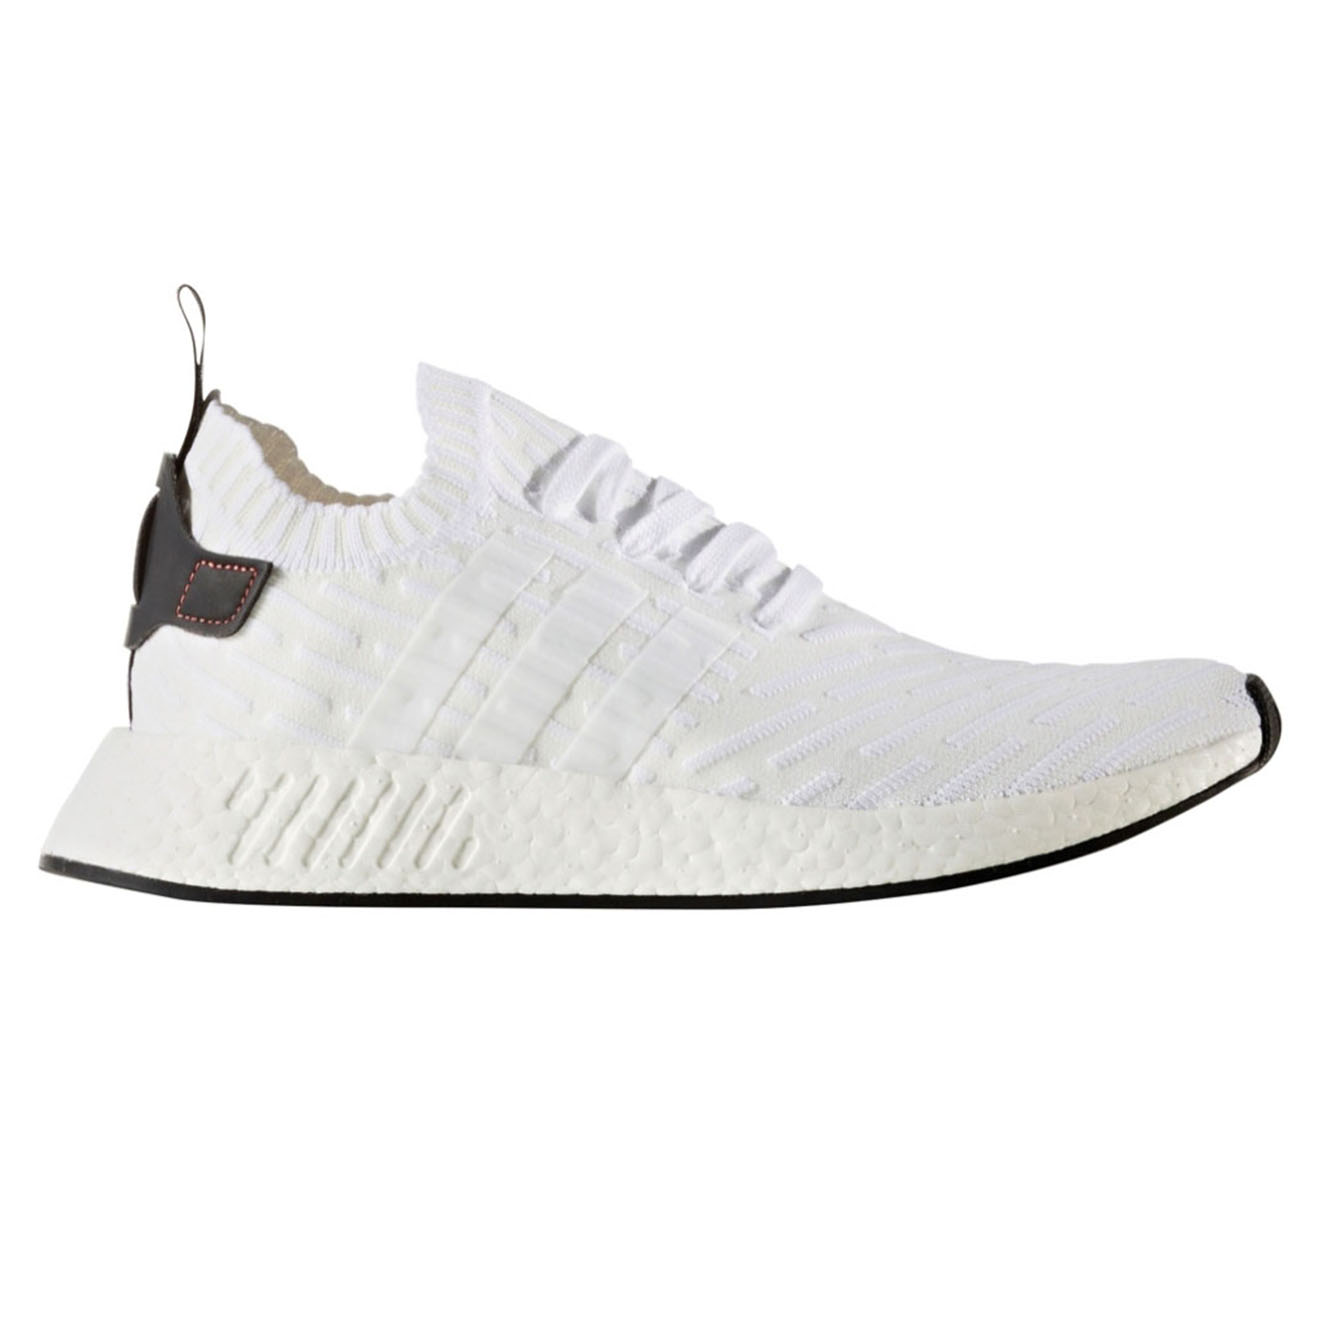 Baskets Nmd_r2 pk blanches